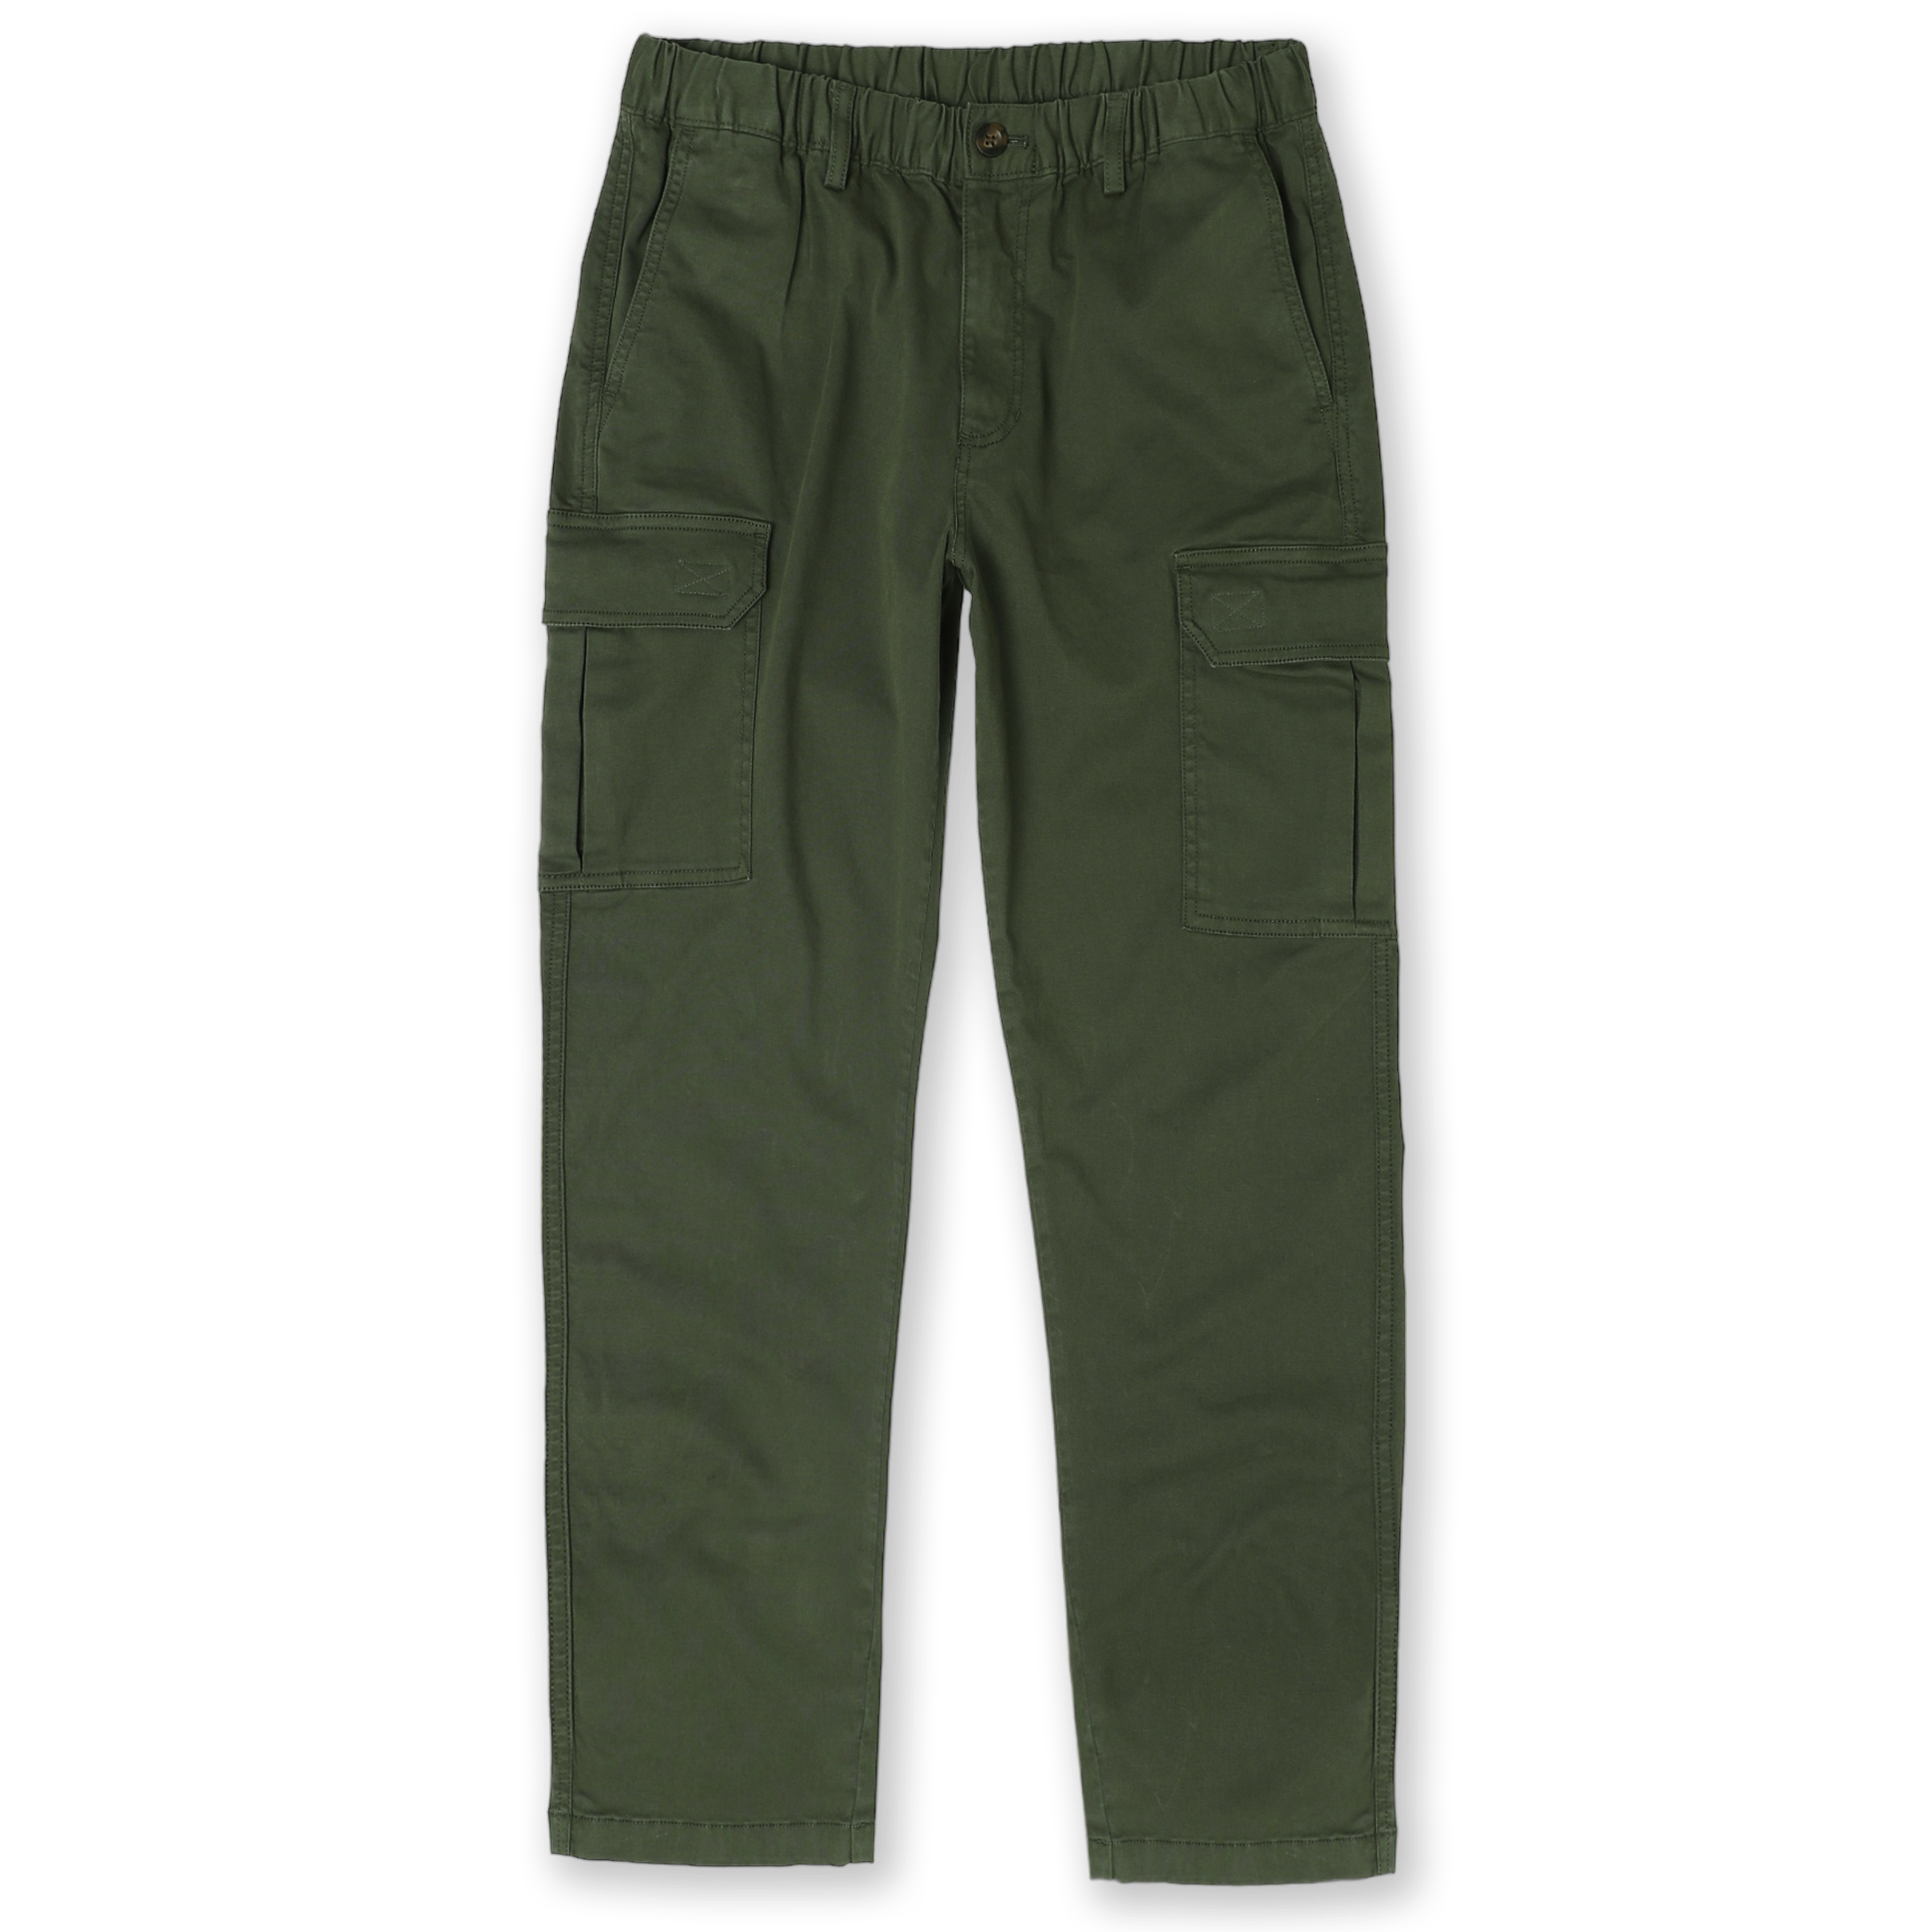 Thick Warm Cargo Stretch Pants Men Autumn Winter Military